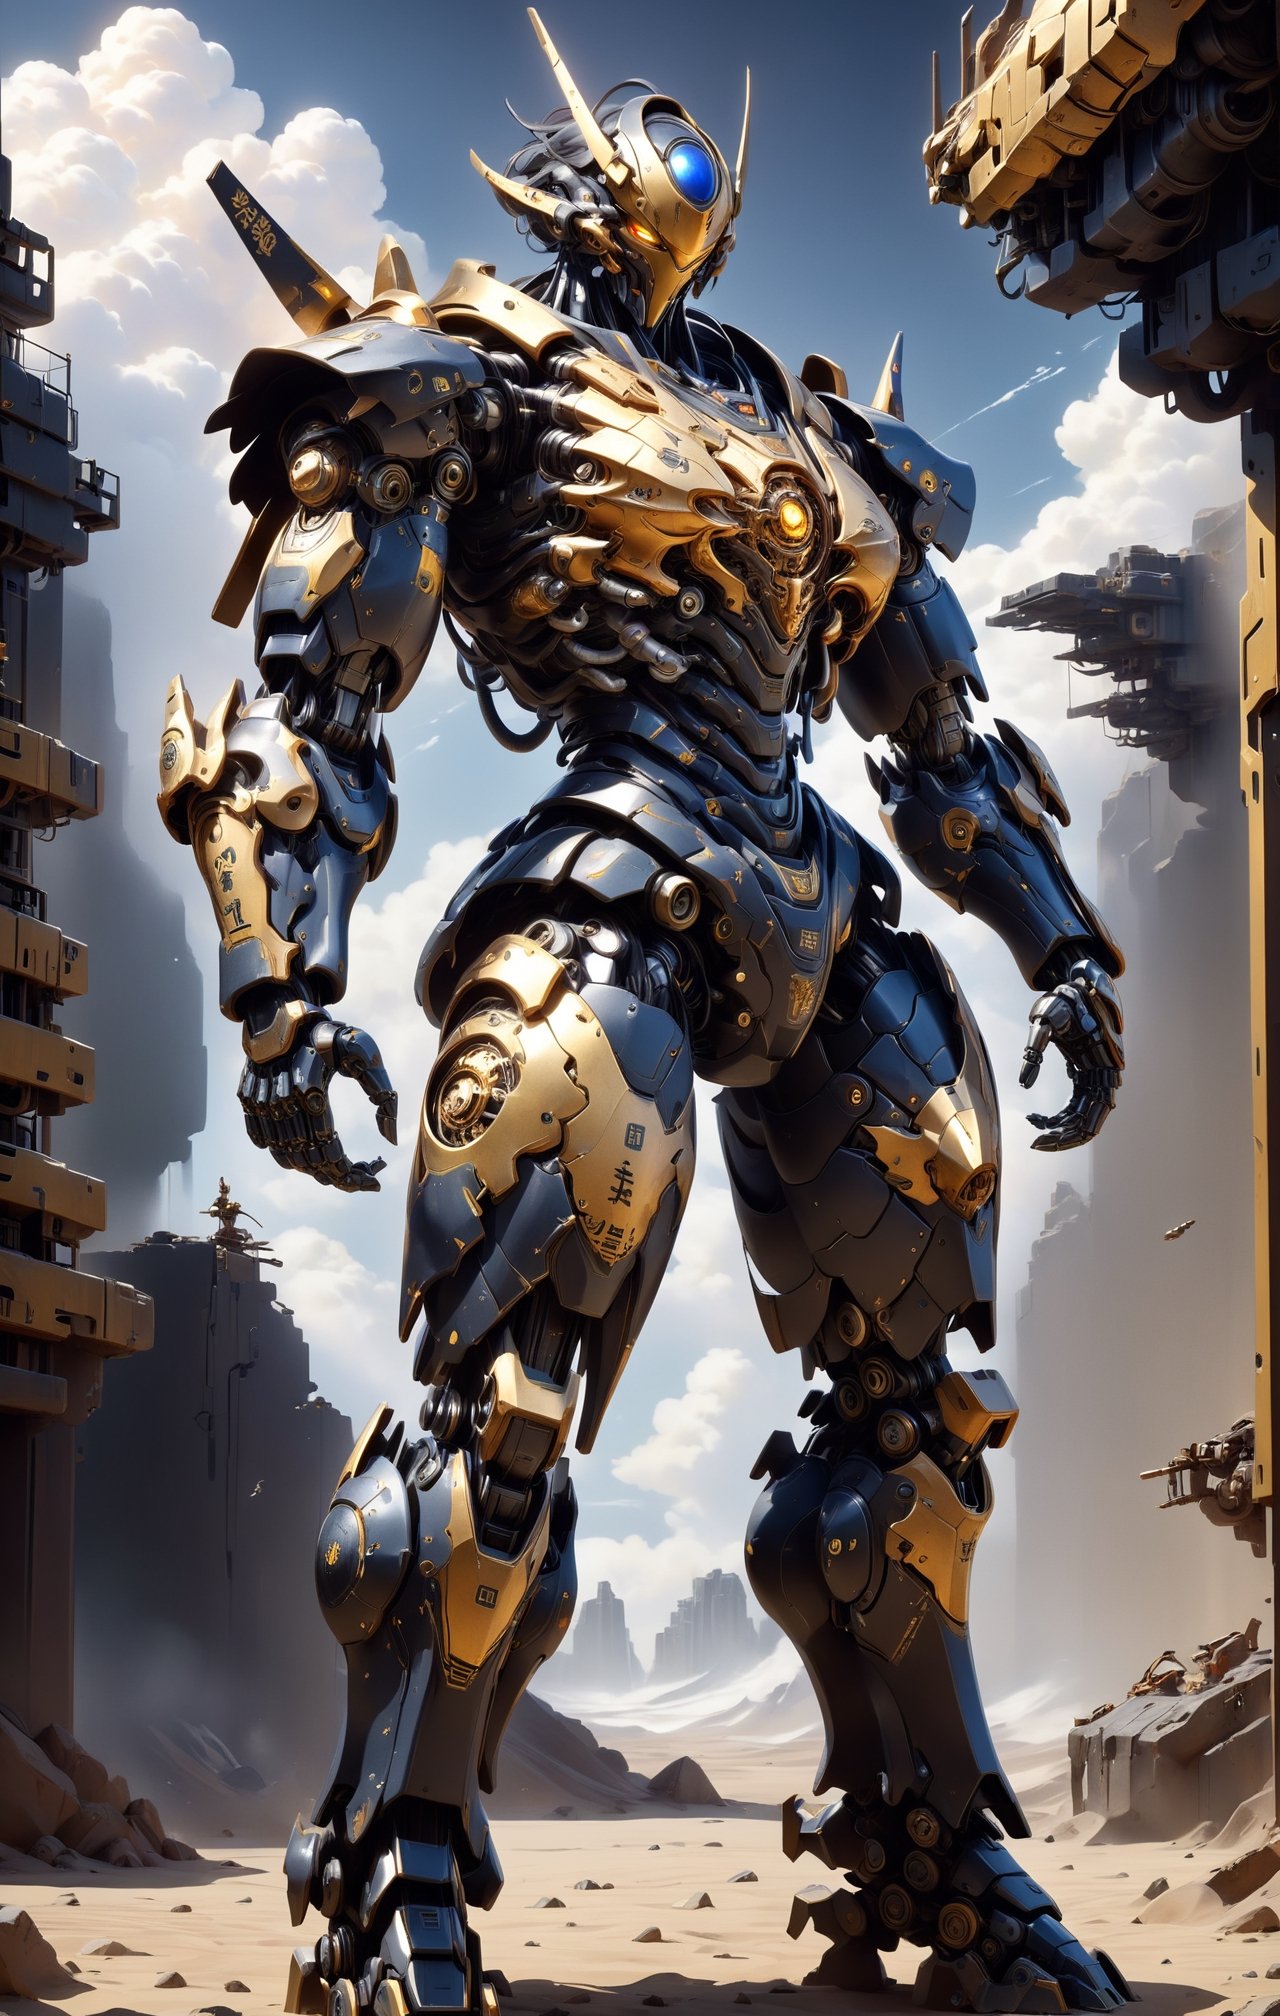 Create image of a detailed, mechanical robot design featuring a prominent deep blue and black color scheme with gold and yellow accents. The robot has complex armor plating with a sleek, non-organic aesthetic. Multiple layers and sections of armor show fine, intricate details, and the interplay of metallic surfaces gives off a reflective quality. Golden Japanese Kanji characters are prominently featured on the chest and various parts of the body, providing a striking contrast to the darker tones. The robot appears to be standing, with one arm slightly raised and the hand gripping a part of its chest armor, which suggests dynamic motion. The background is a blurred sky with clouds that suggest an outdoor setting, with light predominantly coming from above, casting subtle shadows across the robot's form. The use of light and shadow accentuates the three-dimensional aspect of the subject. Some text, including "VEX" and "DOMINATOR," is written on the armor in smaller print, contributing to the militaristic look. nvidia rtx, super-resolution, unreal 5, subsurface scattering, pbr texturing, 32k UHD